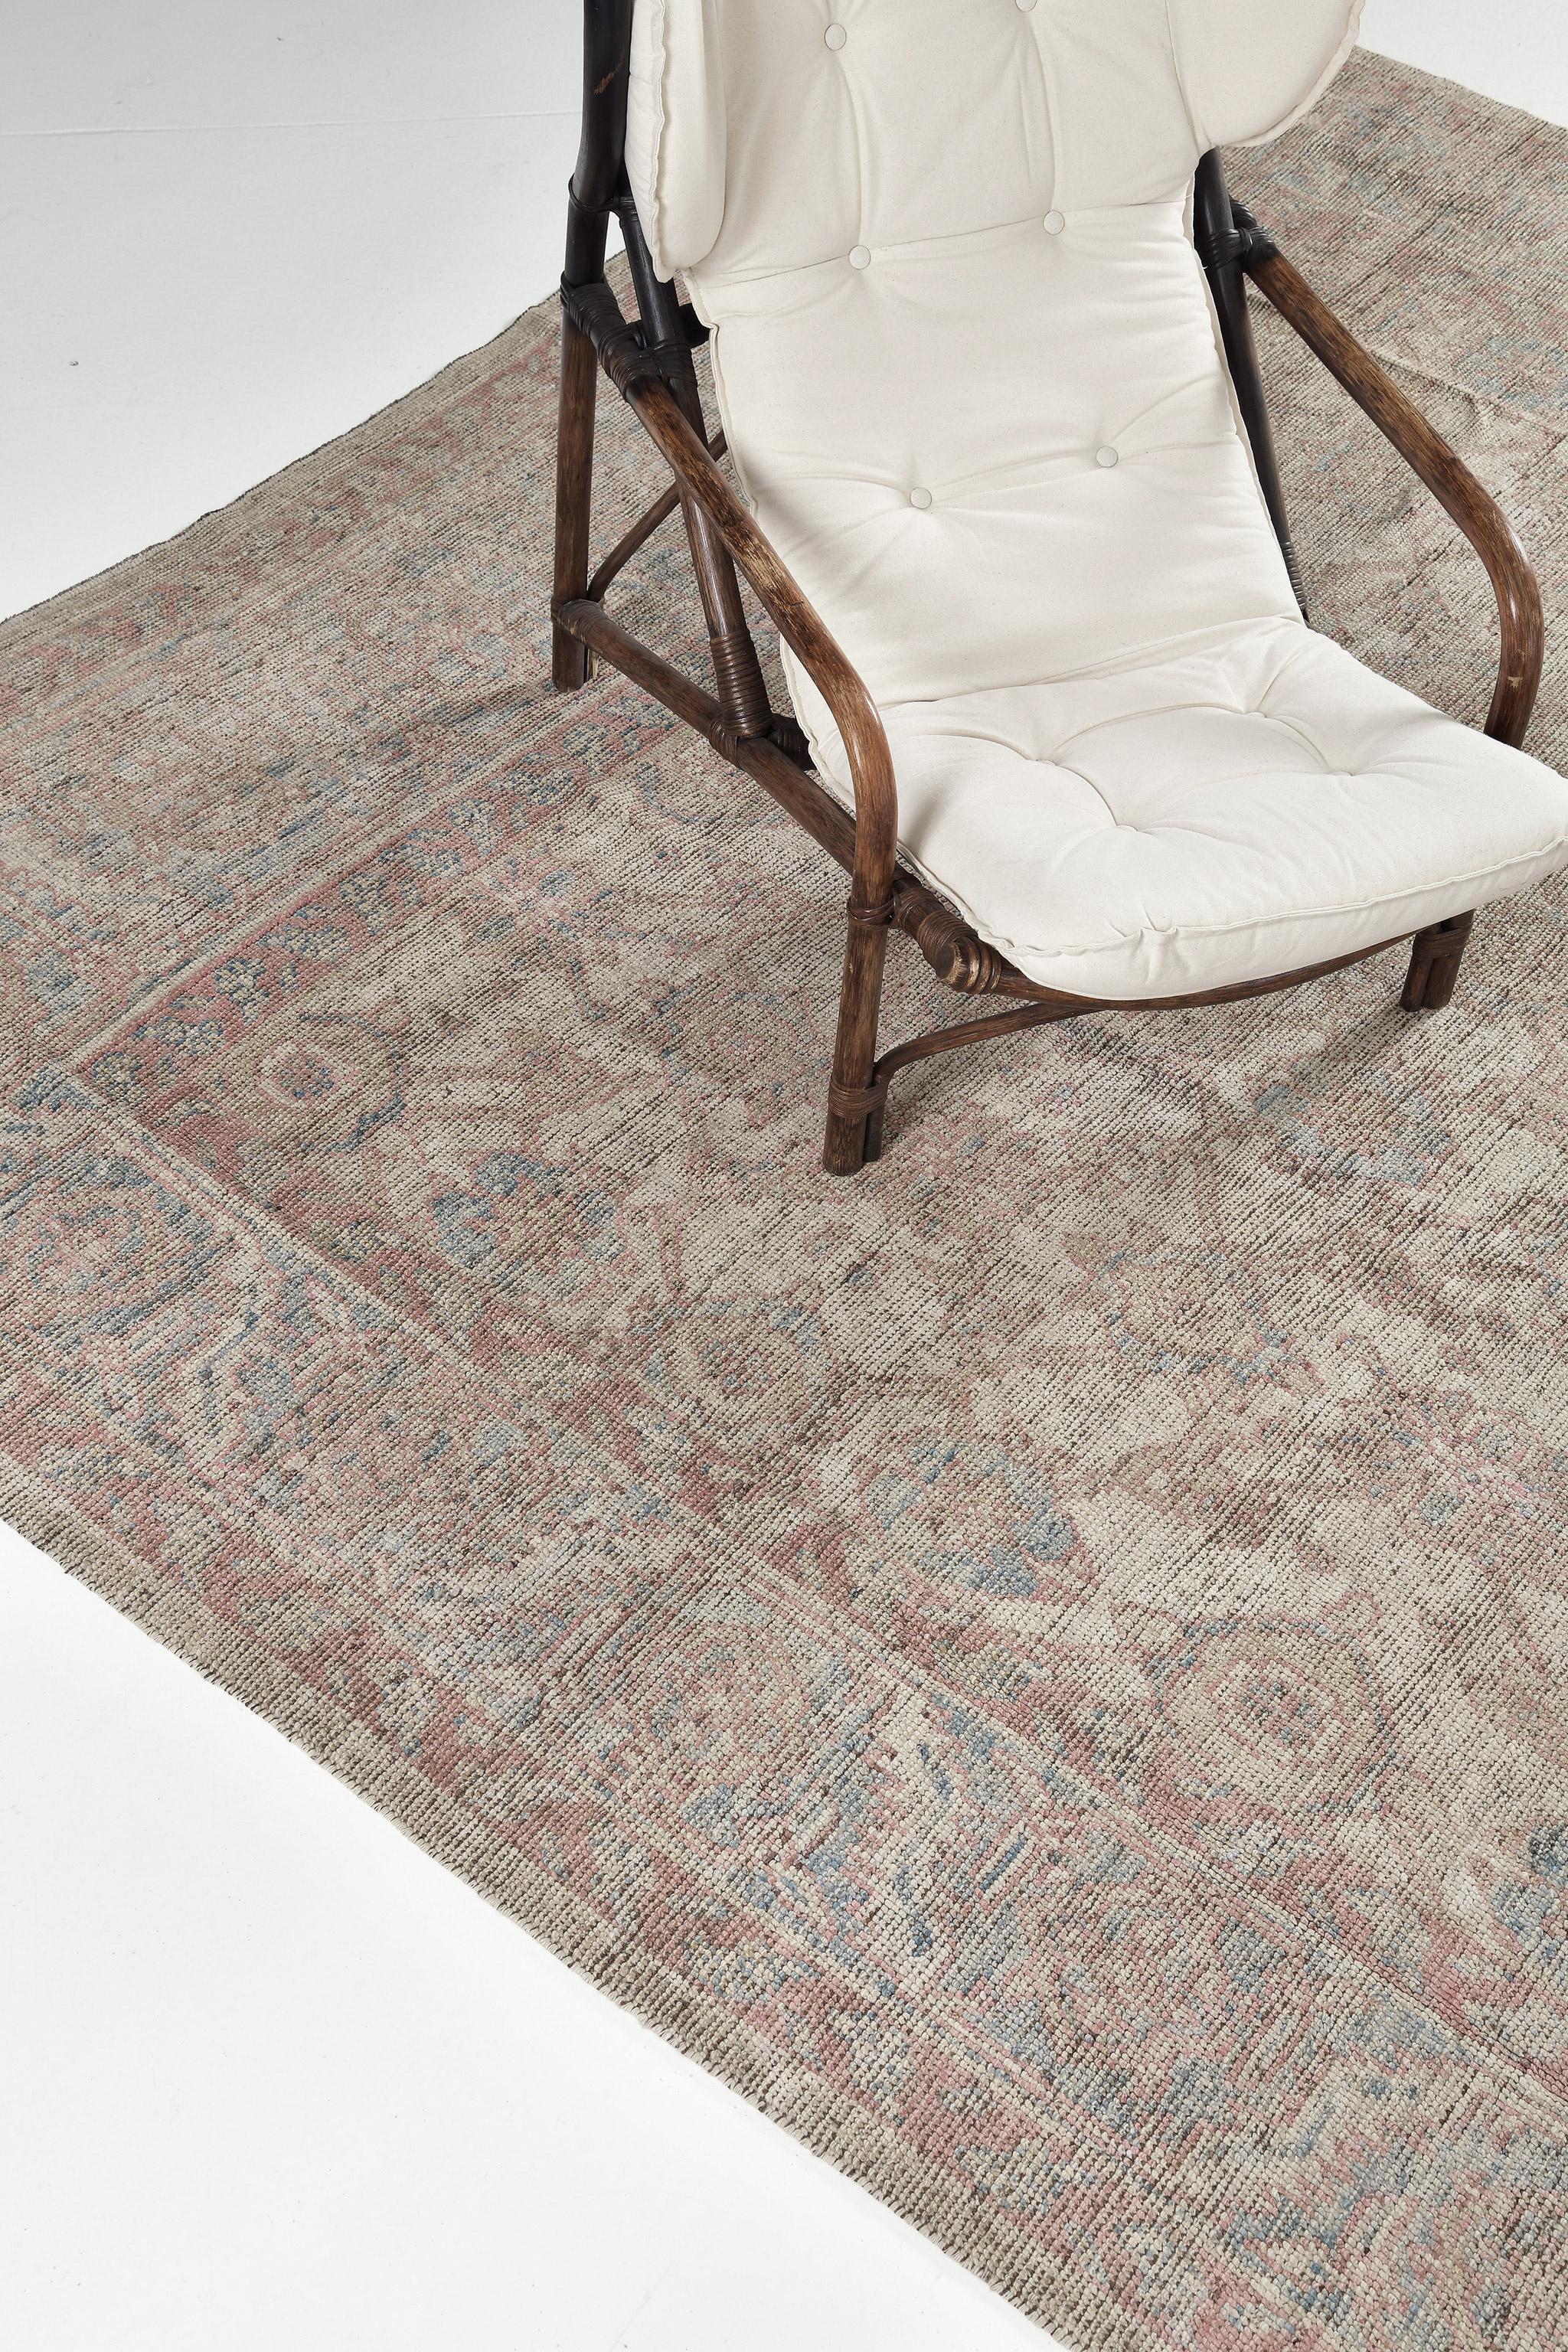 A breathtaking muted revival of Bakhshaish design rug that combines the stunning palmettes and statement vines connected by the leafy tendrils in the shades of coral, dusty blue and beige. This breathtaking rug has a magical presence provided by the